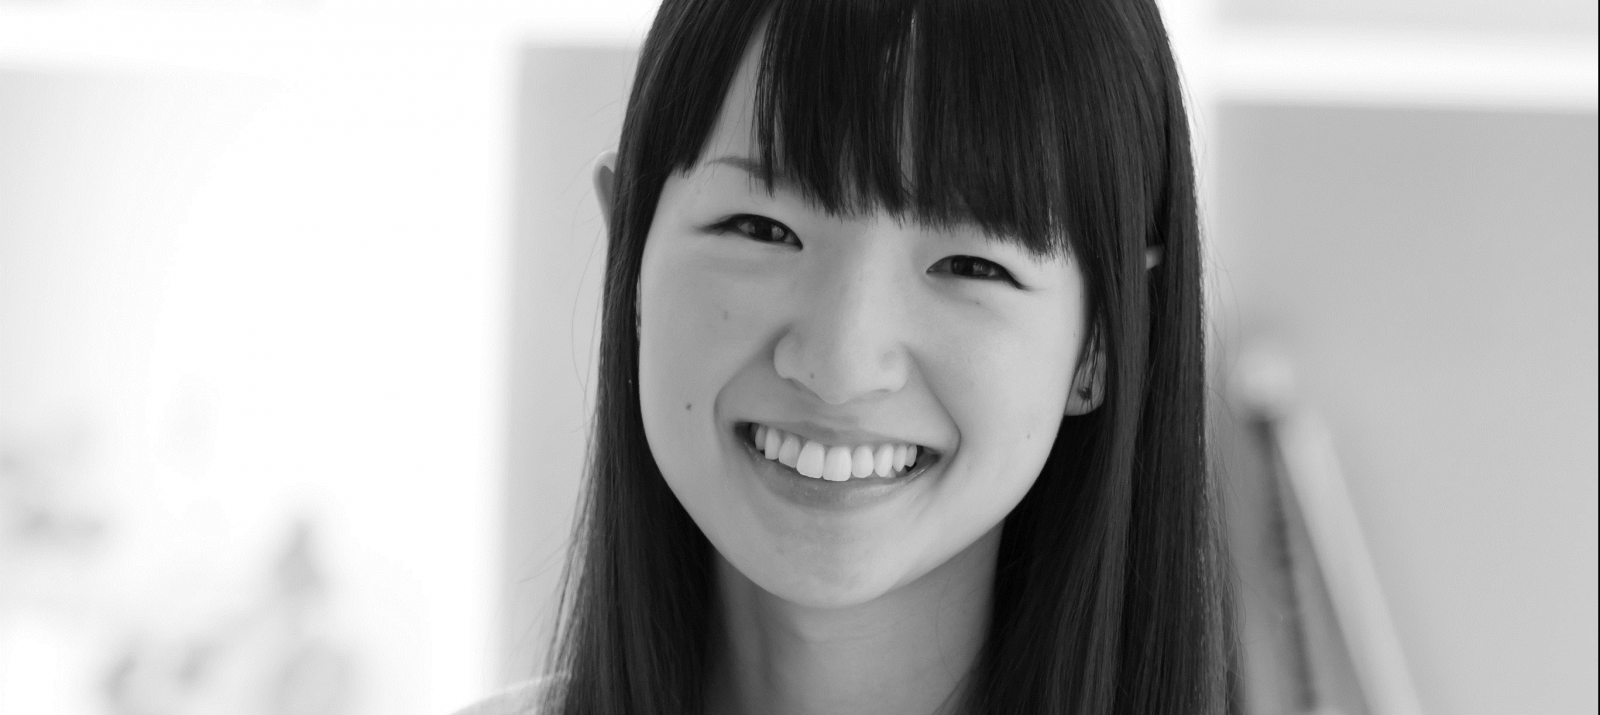 Marie Kondo a famous organizing consultant from Japan and best-selling author of The Life-Changing Magic of Tidying Up: The Japanese Art of Decluttering and Organizing.